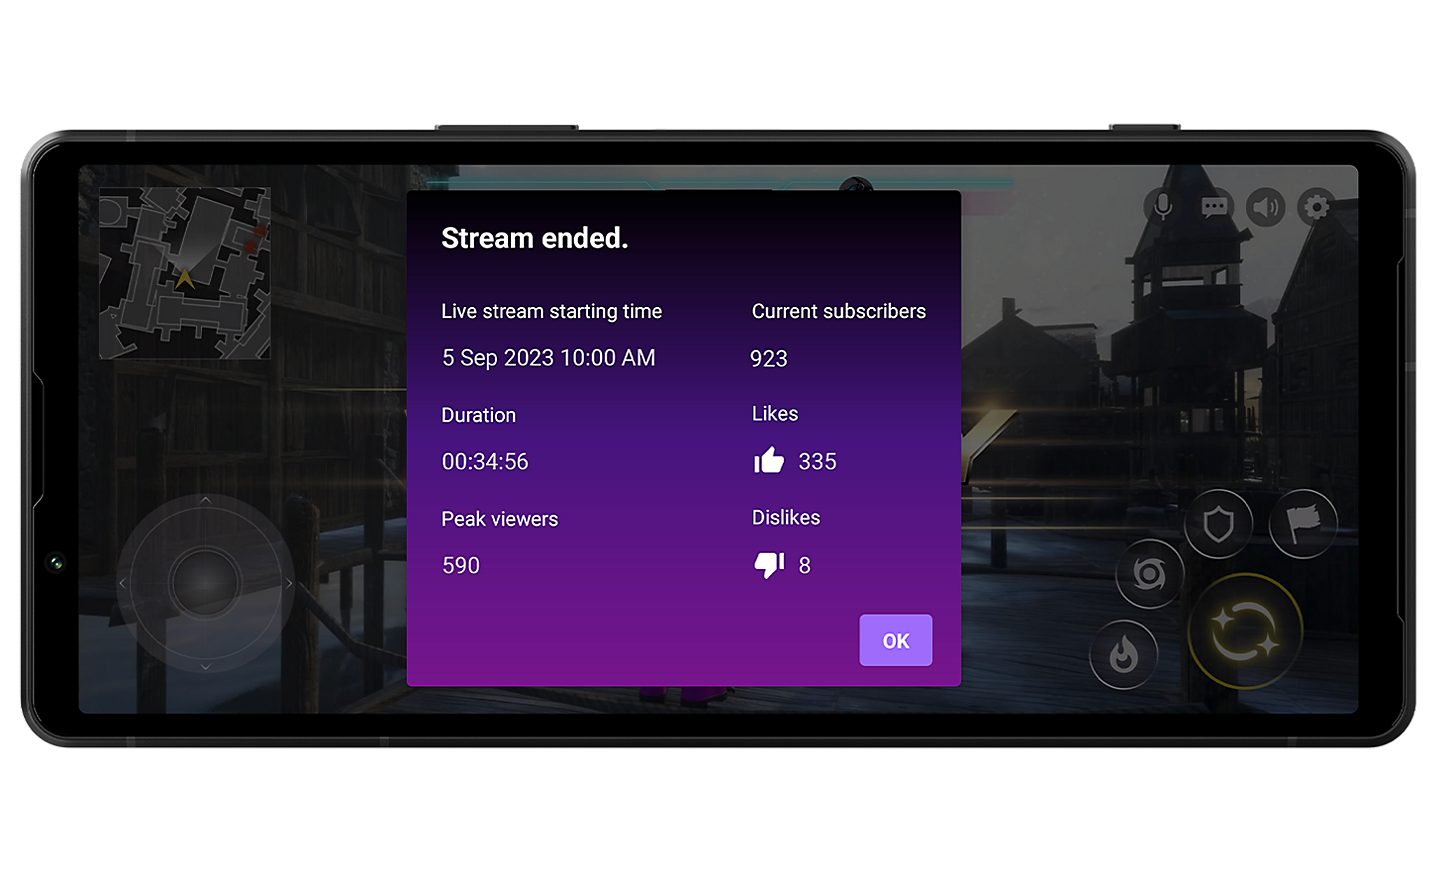 Image of an Xperia 5 V with a streaming summary interface on screen